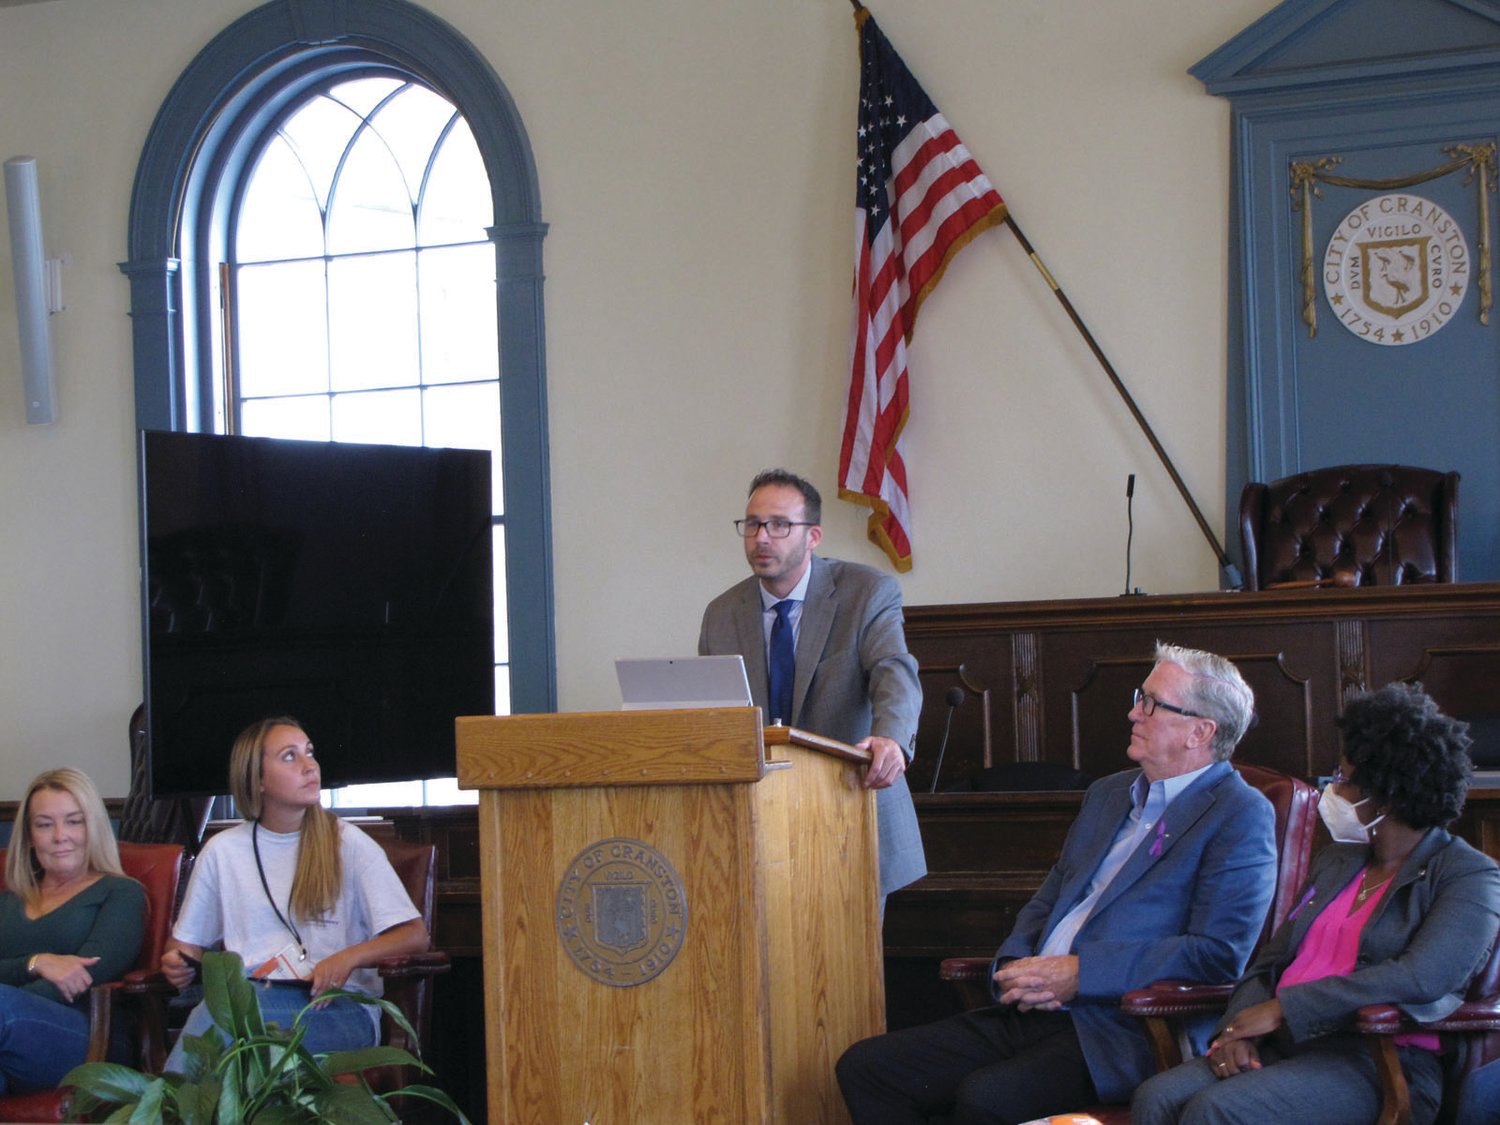 SHARING HIS STORY: Ward 6 Councilman Matthew Reilly speaks about his addiction and recovery during a Recovery Month event last week in City Hall’s Council Chambers. Looking on, from left, are Tara Canavan, Megan Perry, Mayor Ken Hopkins and Ward 2 Councilwoman Aniece Germain.